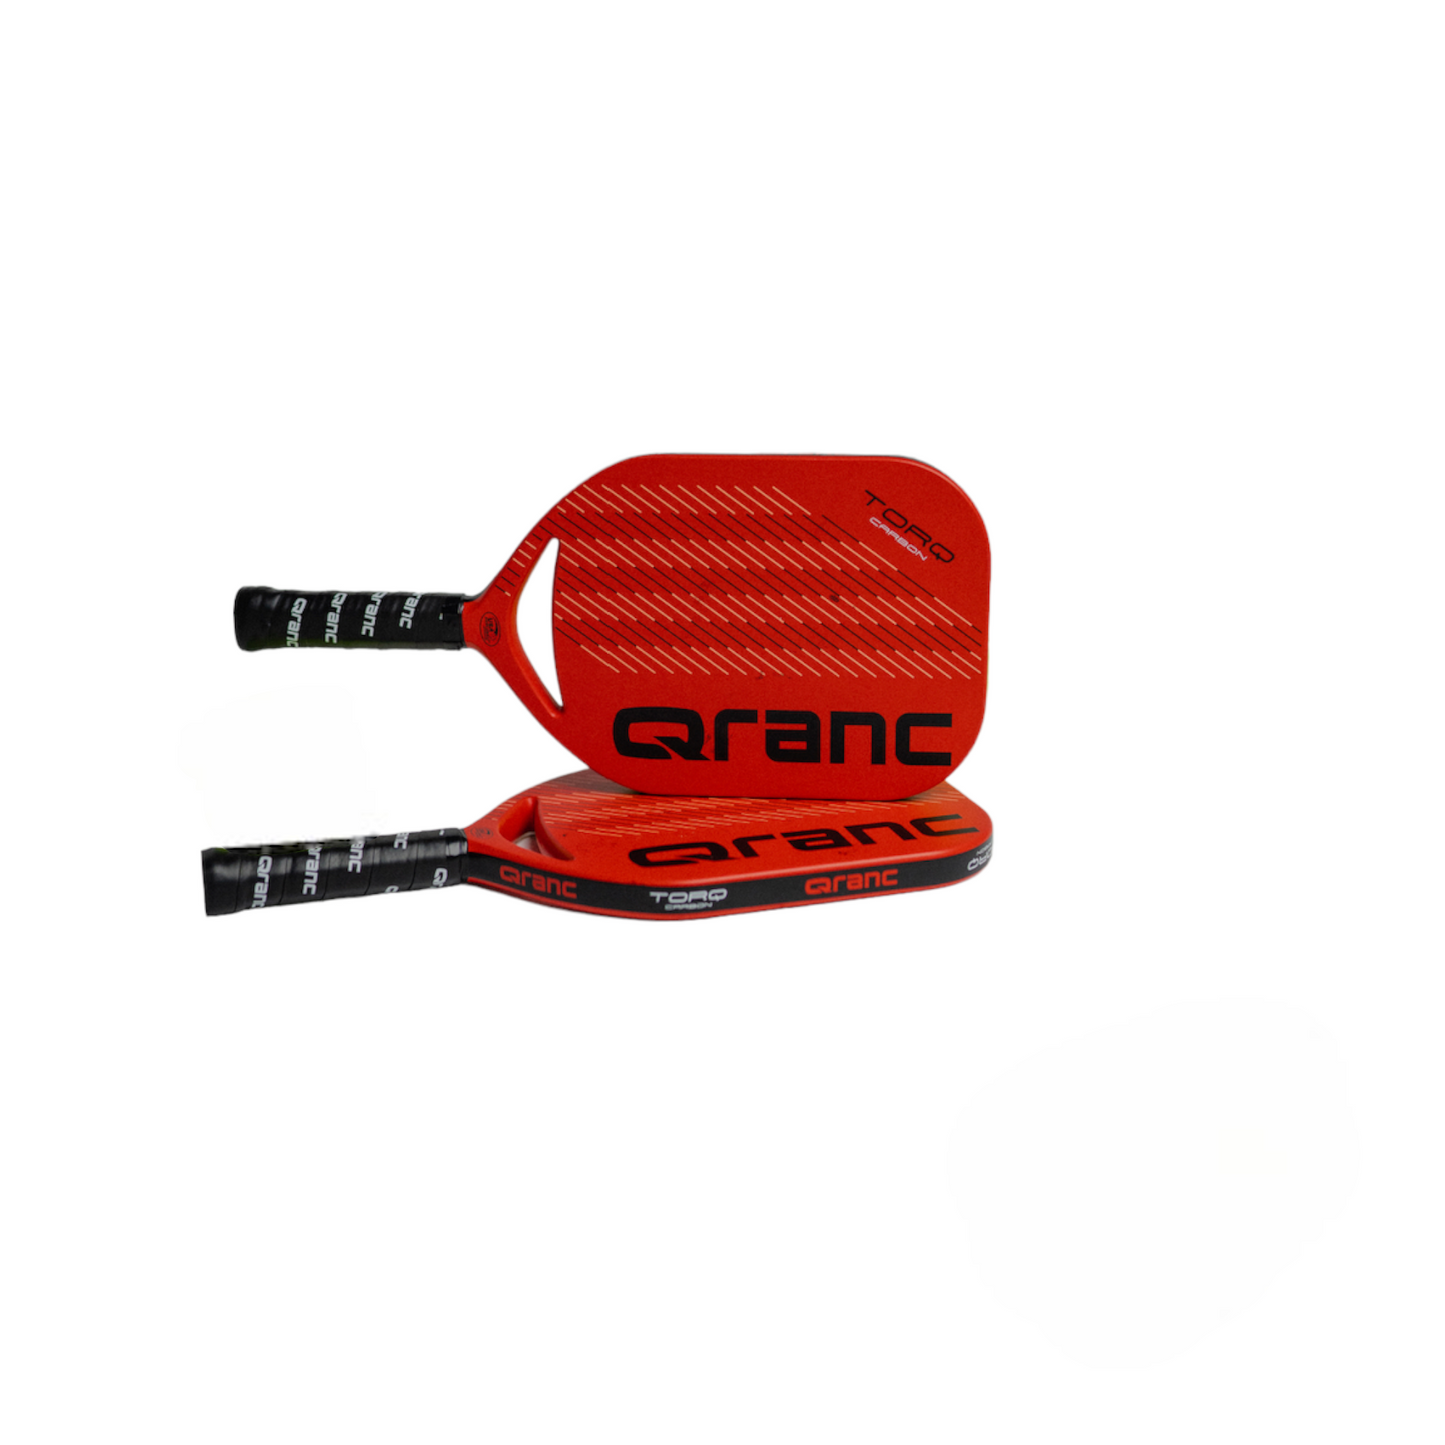 Qranc's High Tech TorQ Pickleball Paddle | Designed to Elevate Your Game, No Matter Your Skill Level